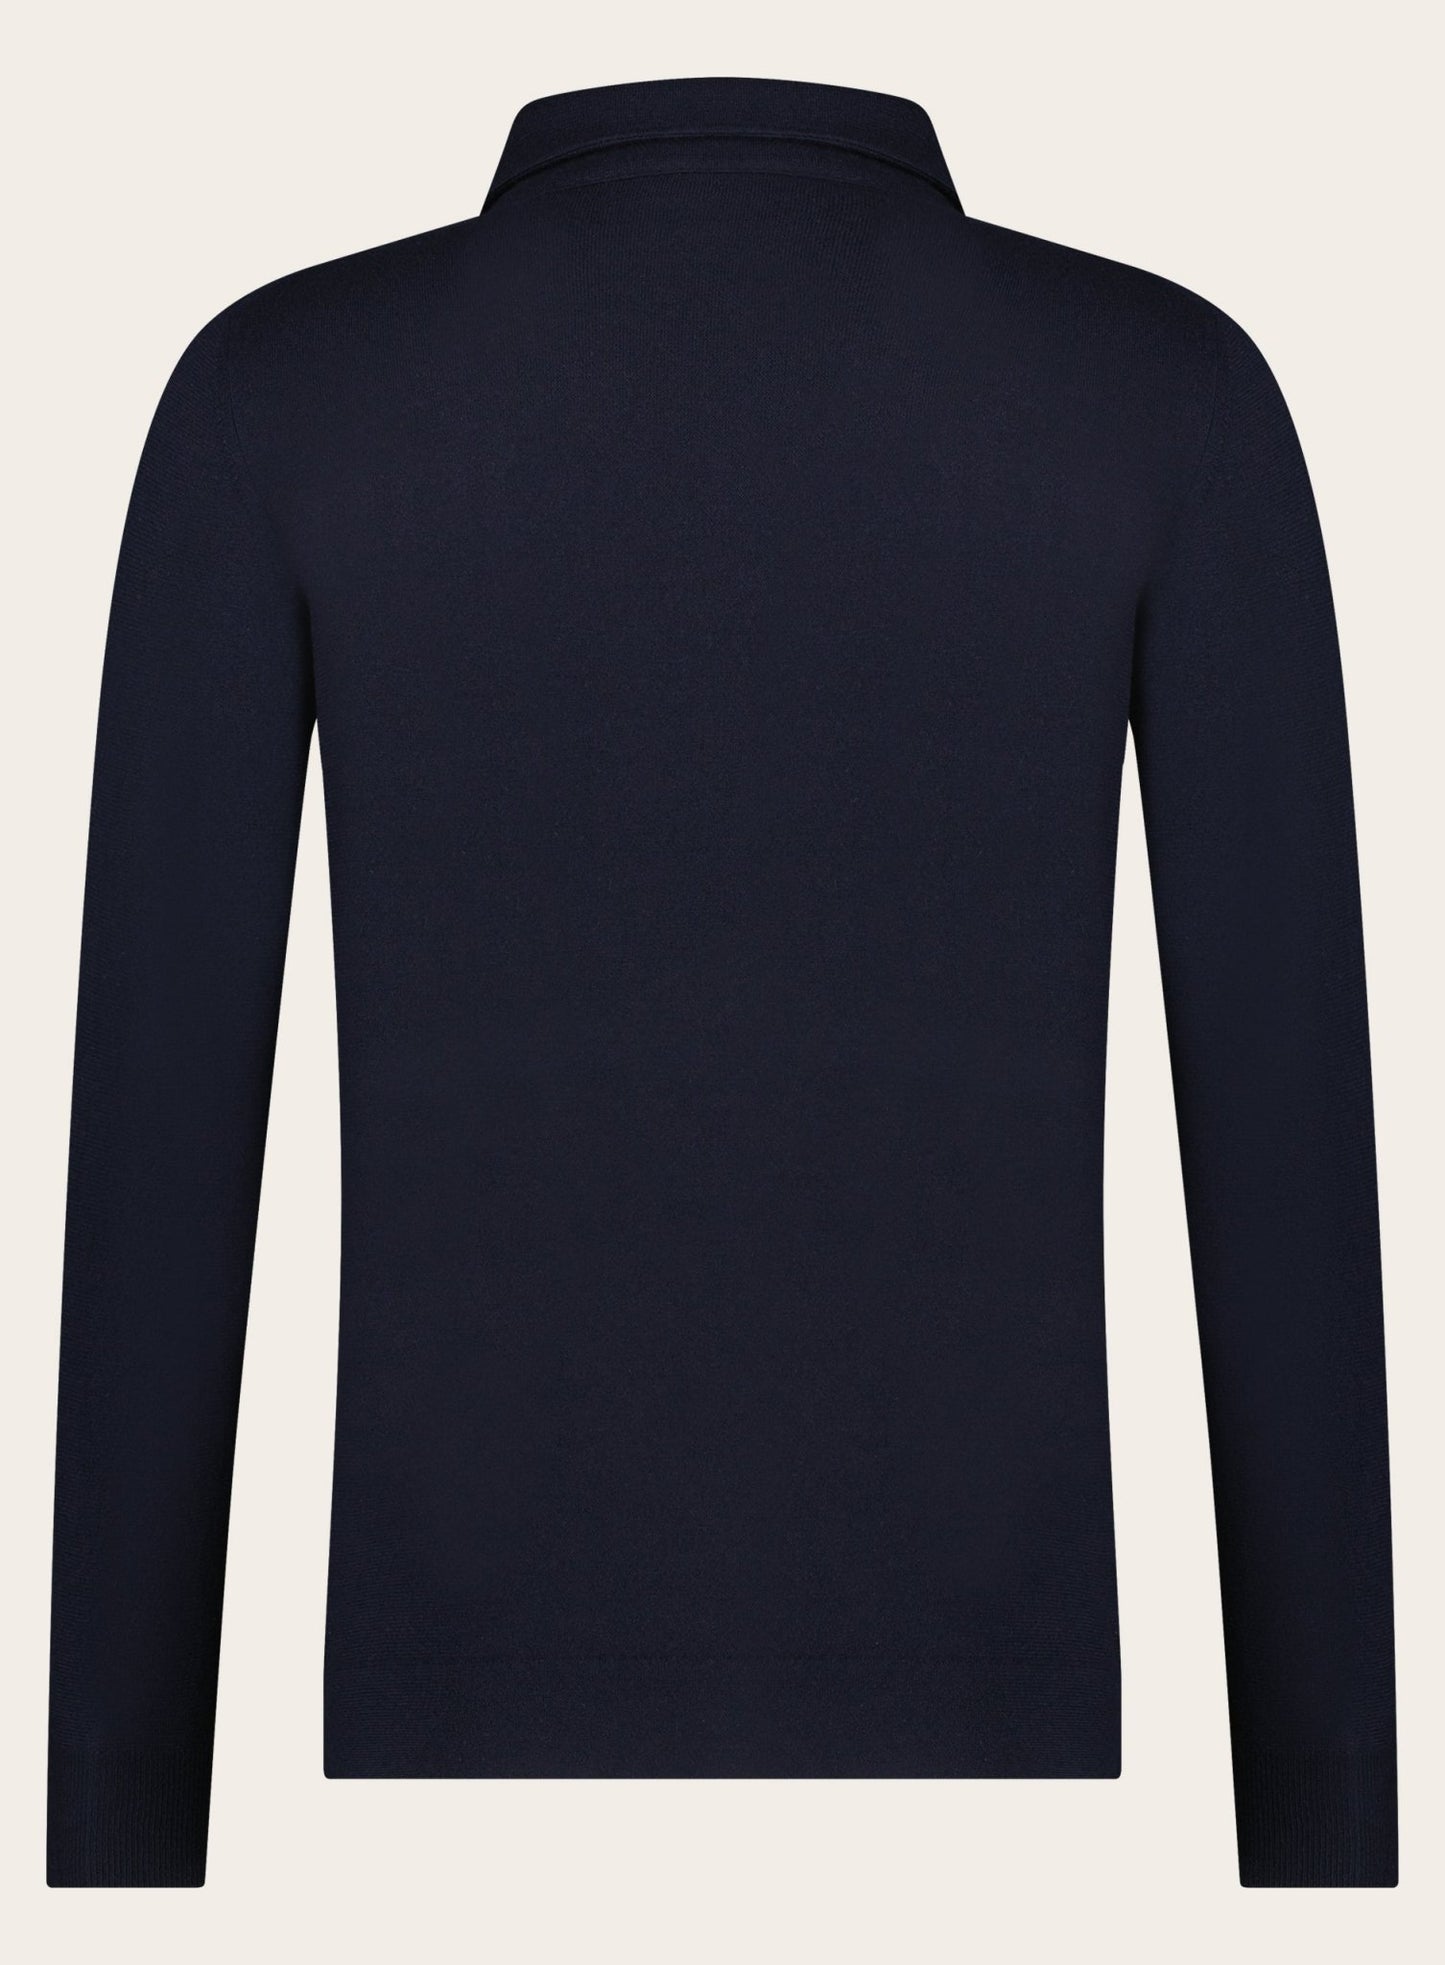 Baby cashmere lange mouwen polo | BLUE NAVY